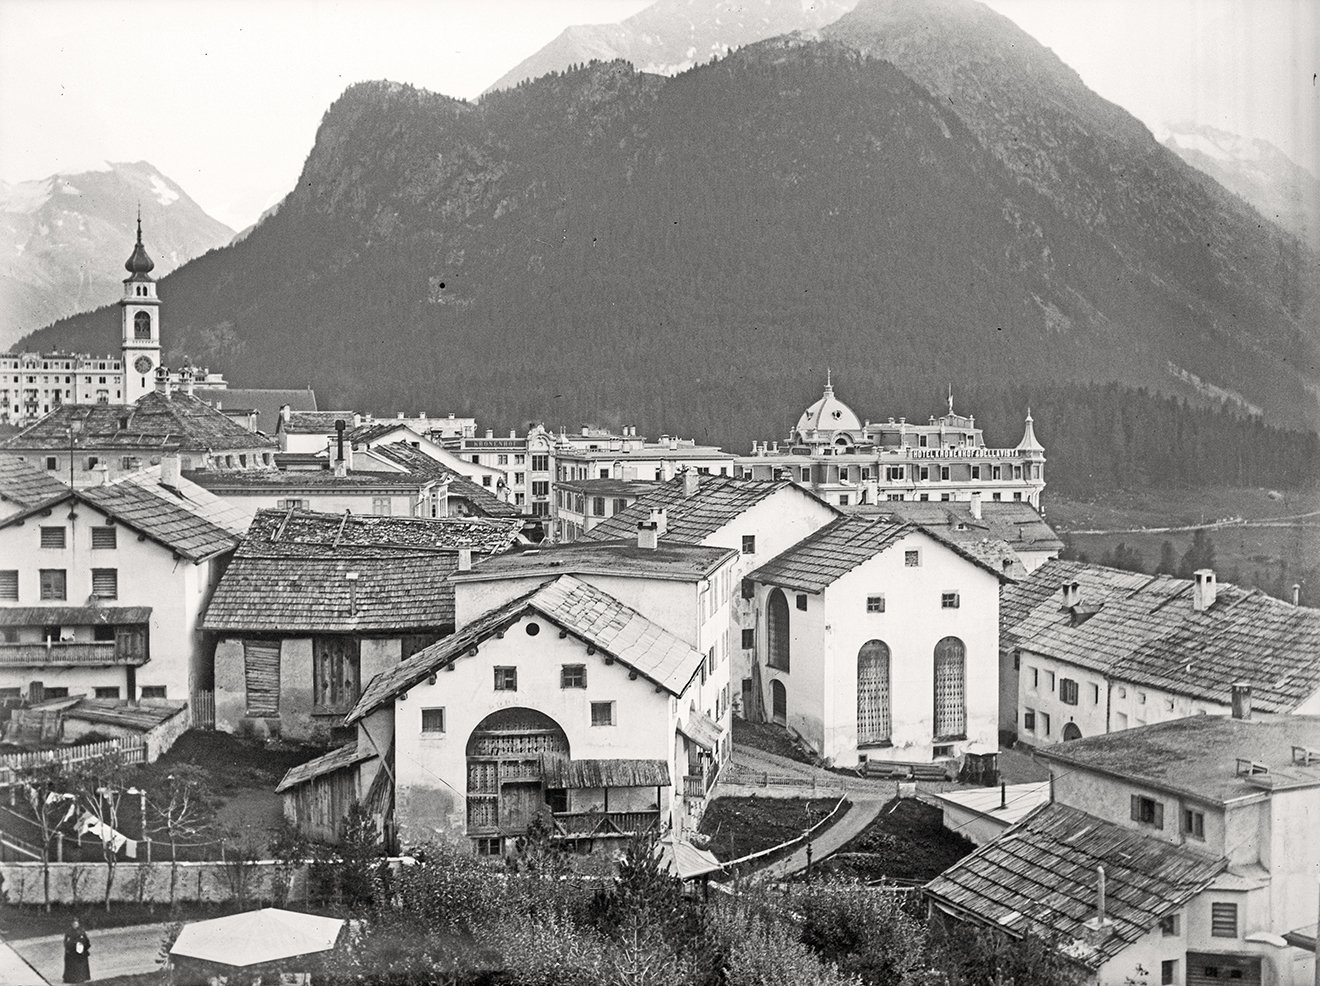 Aussicht vom Dach des Hotels Weisses Kreuz in Pontresina (August-September 1900), 86569_o (DRM CC BY-NC-SA)